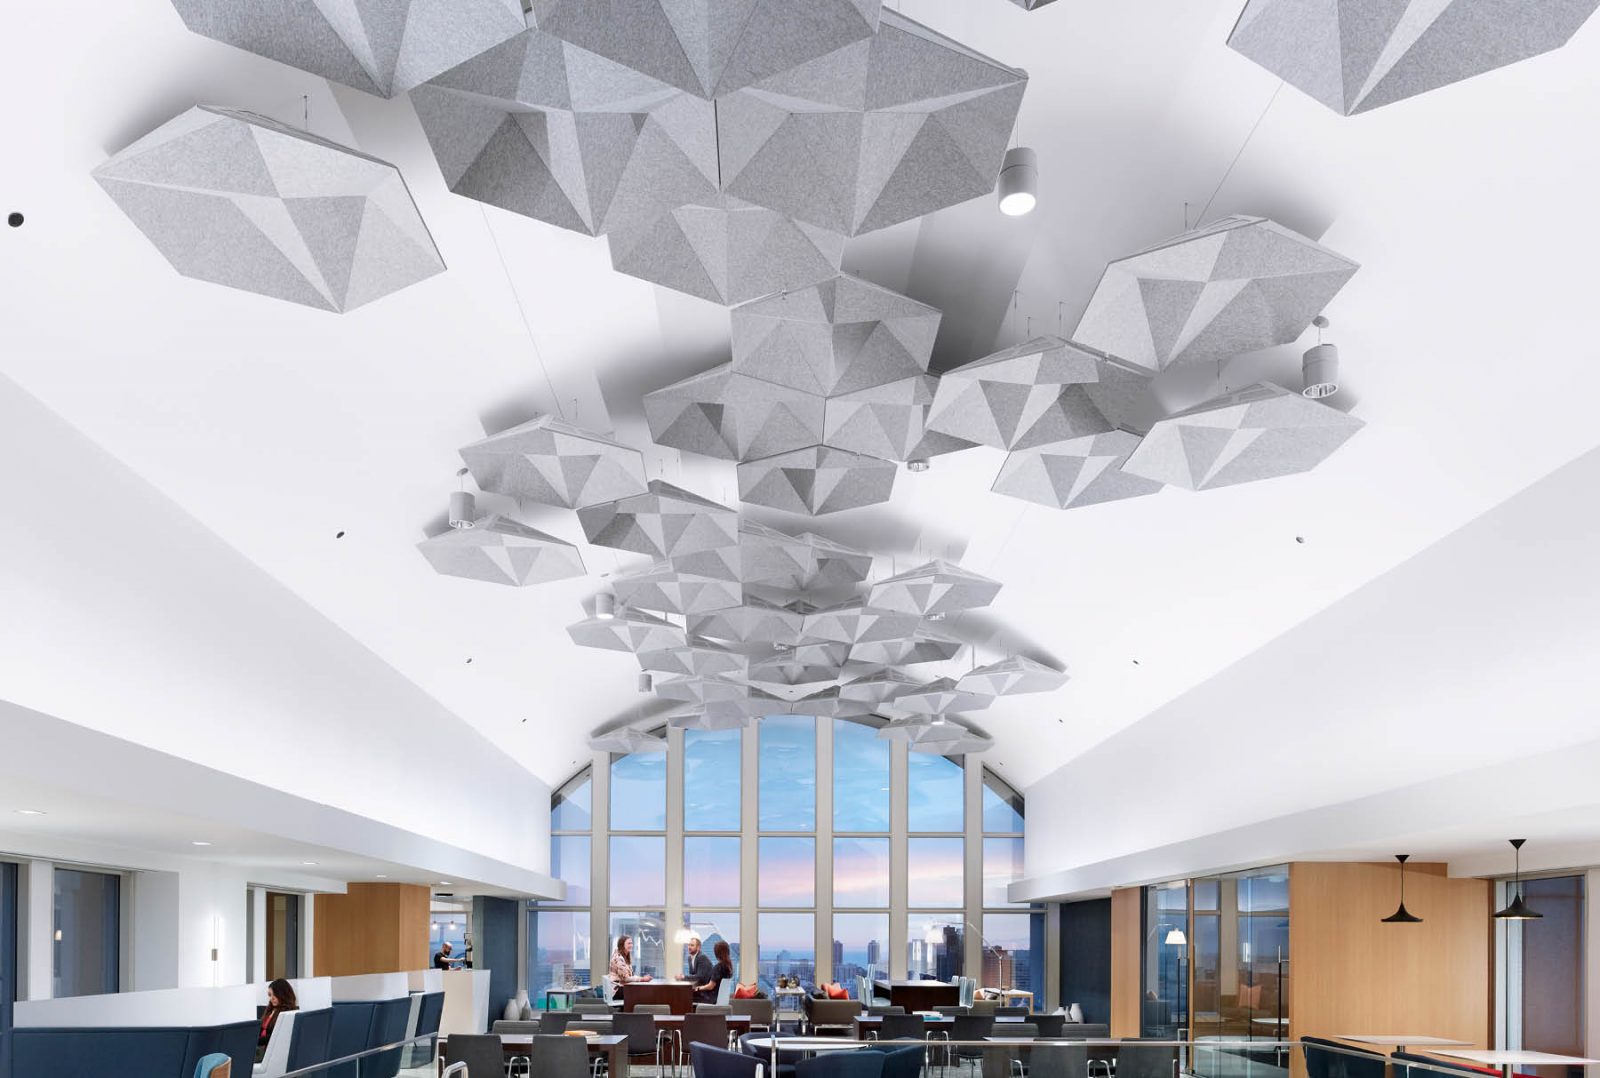 The Most Amazing Ceiling Decorations And Installations From Around